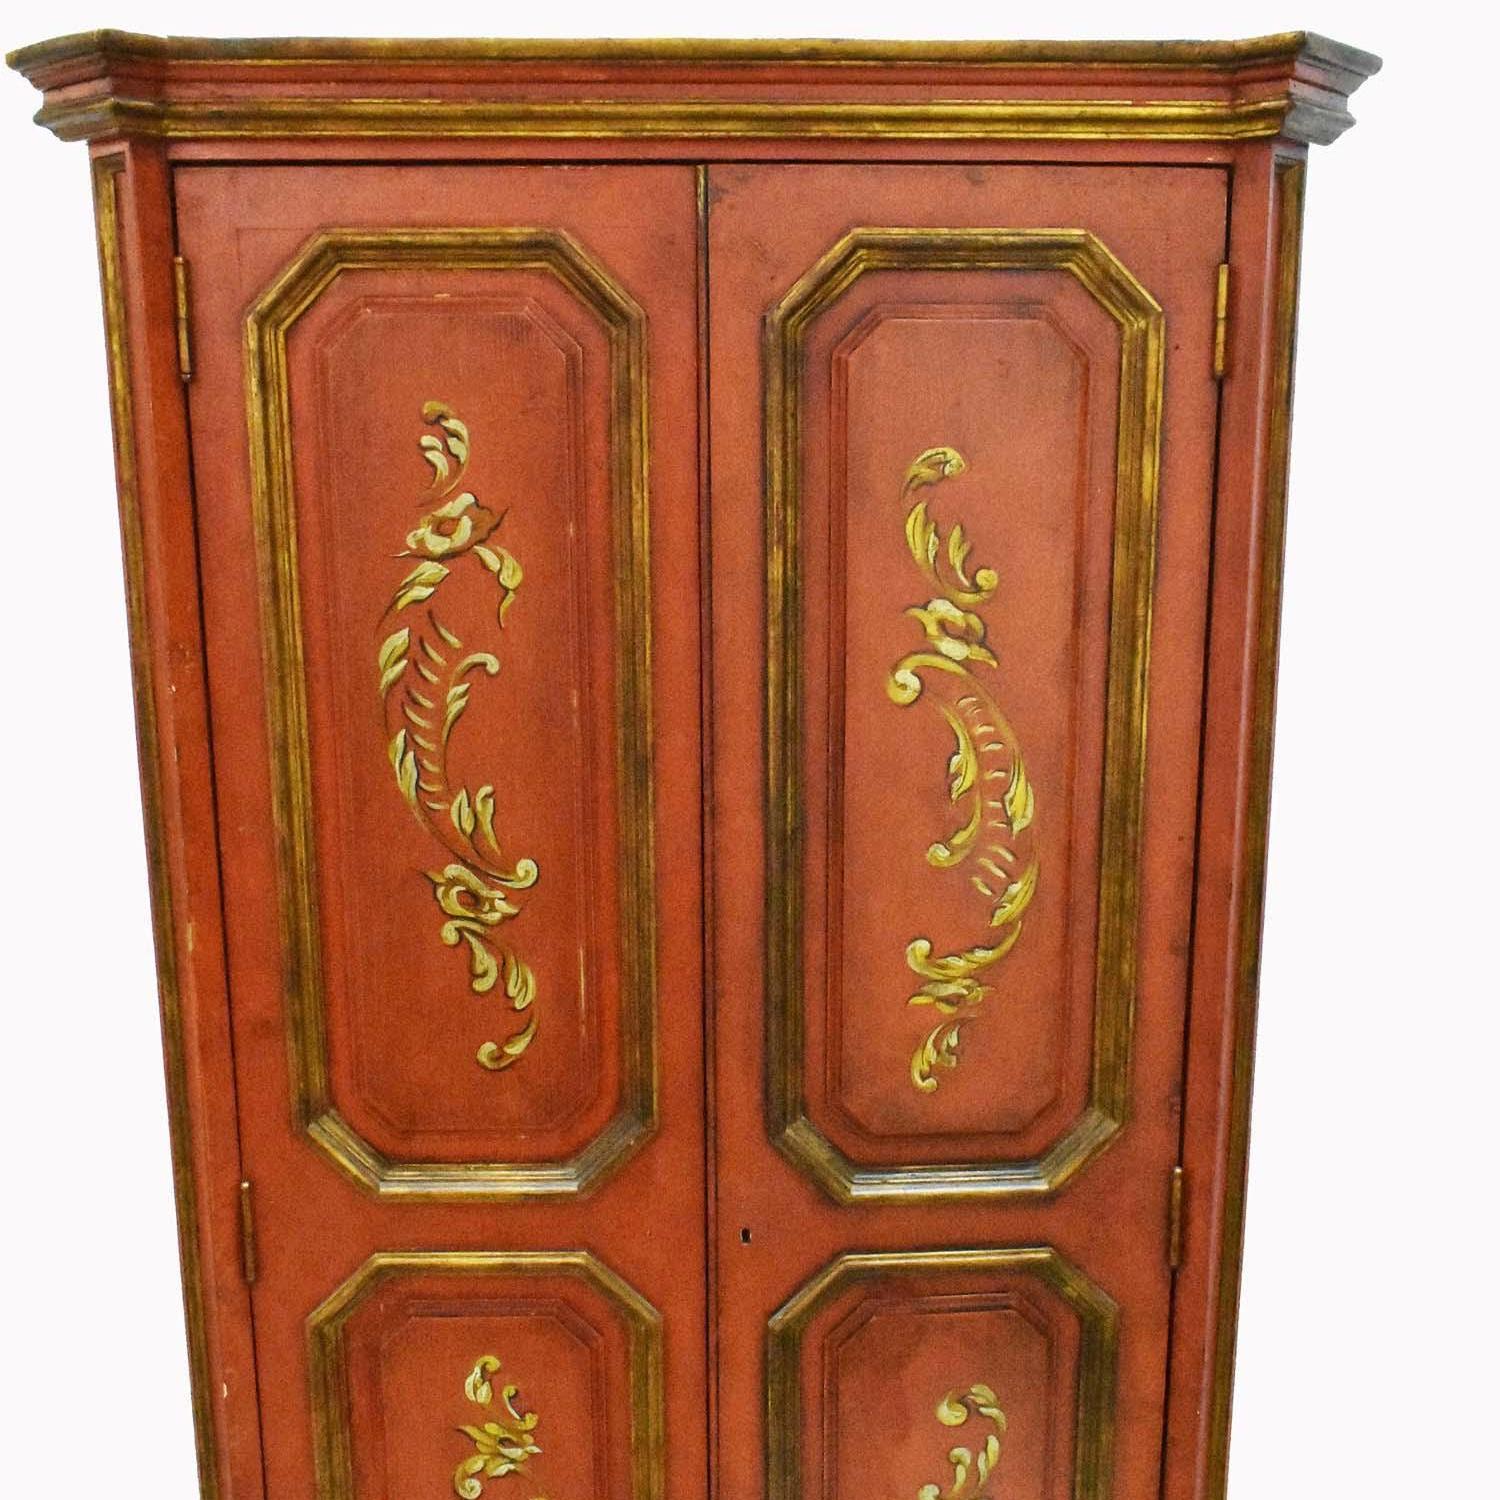 This is a very nice Armoire or Cupboard made First Half 20th Century in Spain. Rectangular, with a pair of paneled doors opening to a fitted interior, with a shelf and gilt spindles, the corners with canted stiles, decorated with gilt foliage. A